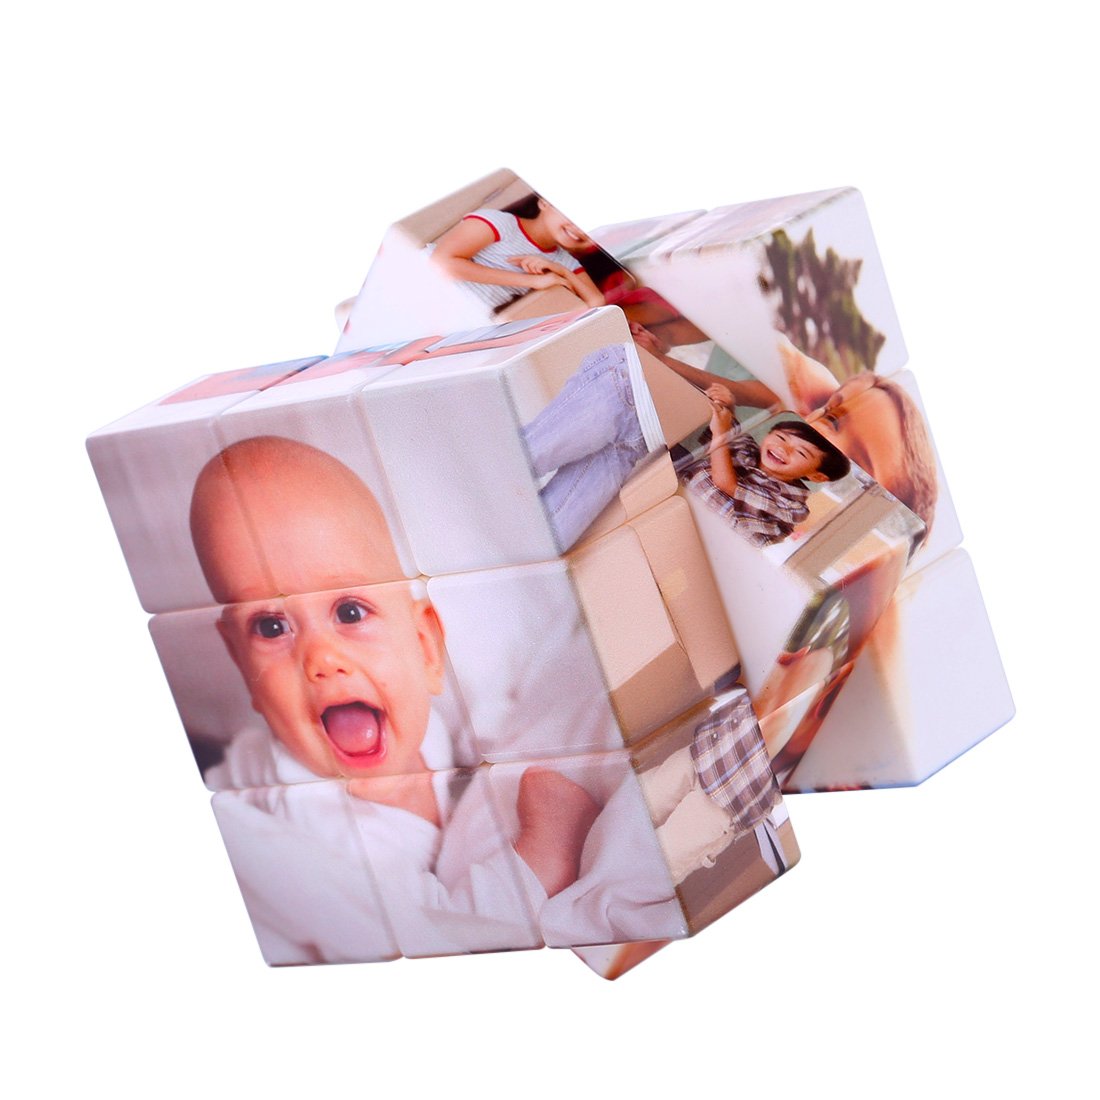 Customize your Own 3X3 Cubes from Moyustore - Stickerless